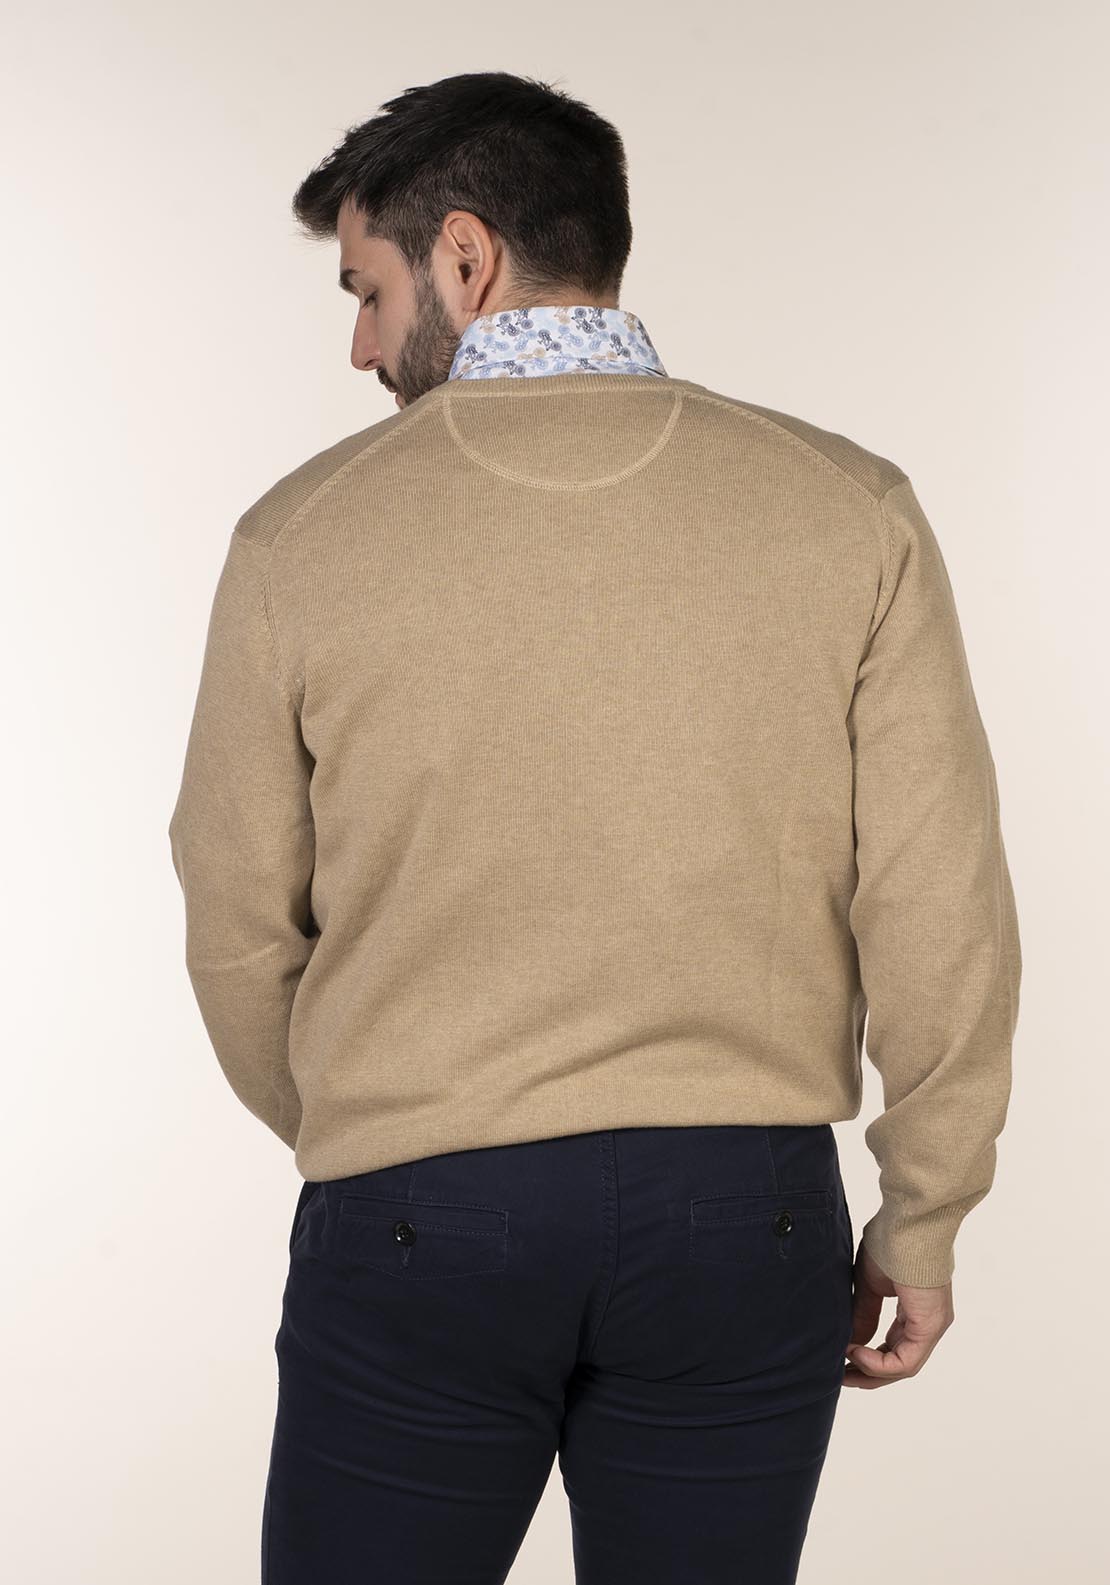 Yeats Plain Cotton V Neck Sweaters - Beige 5 Shaws Department Stores